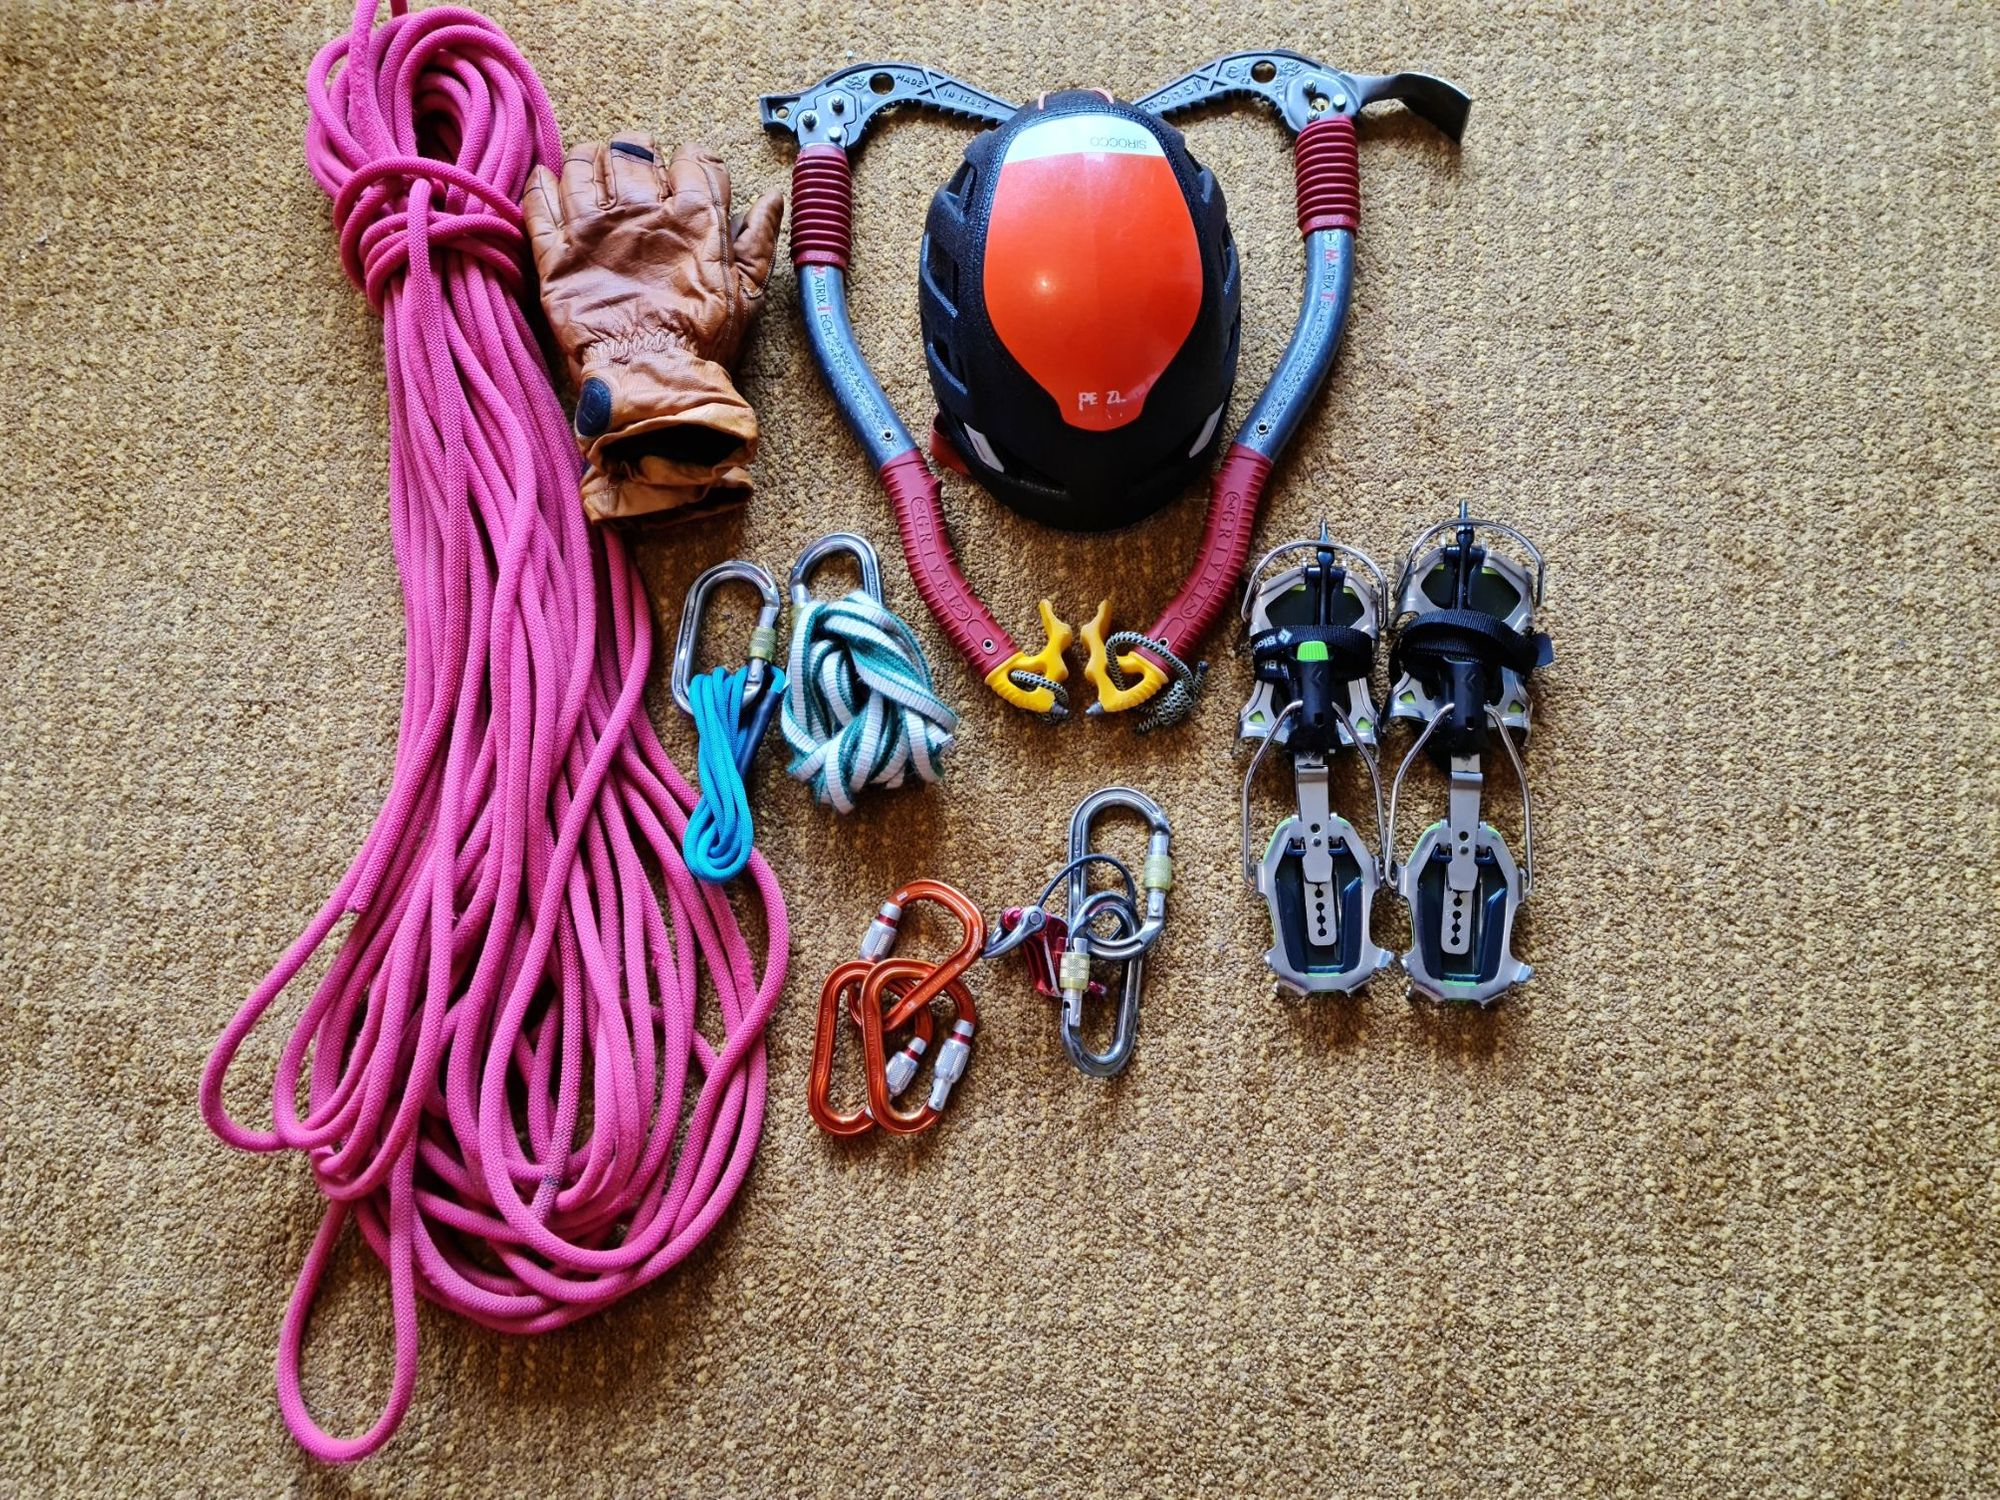 Winter climbing equipment including rope, gloves, carabiners, crampons, helmet and a pair of technical axes.